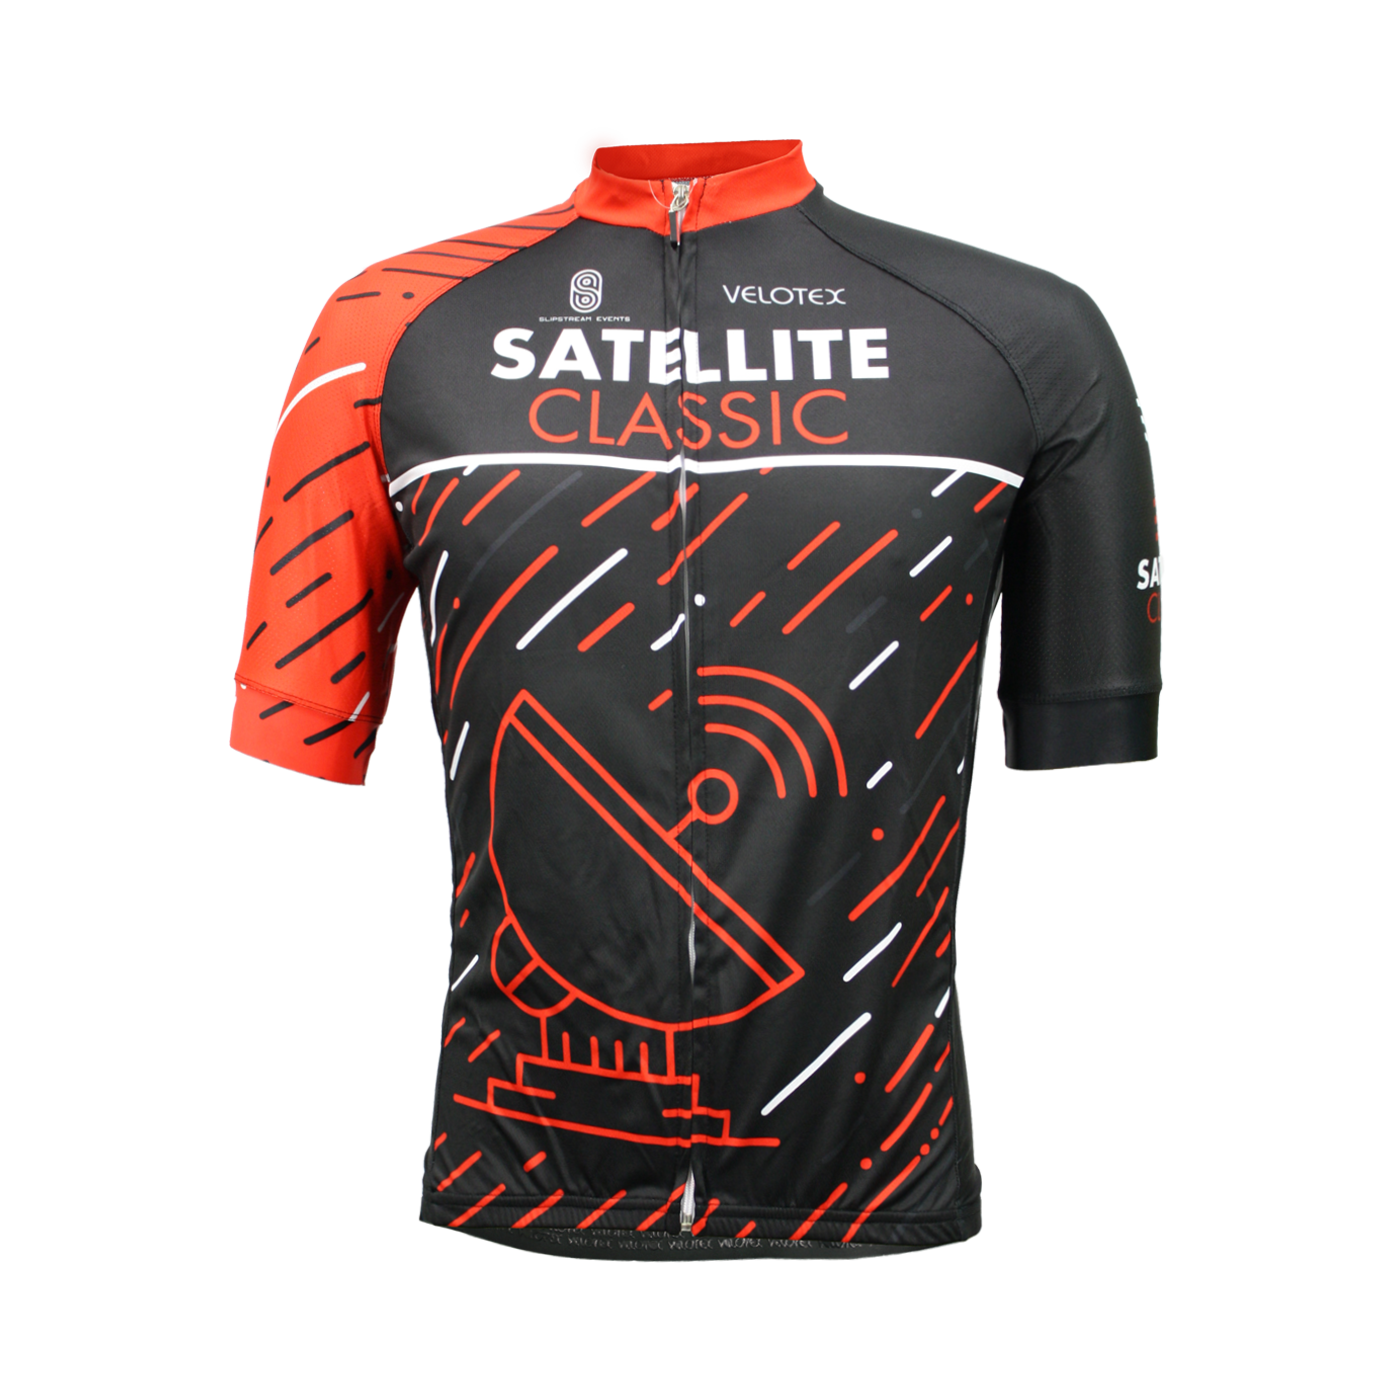 Satellite Classic Cycling Jersey Mens Vento/PV